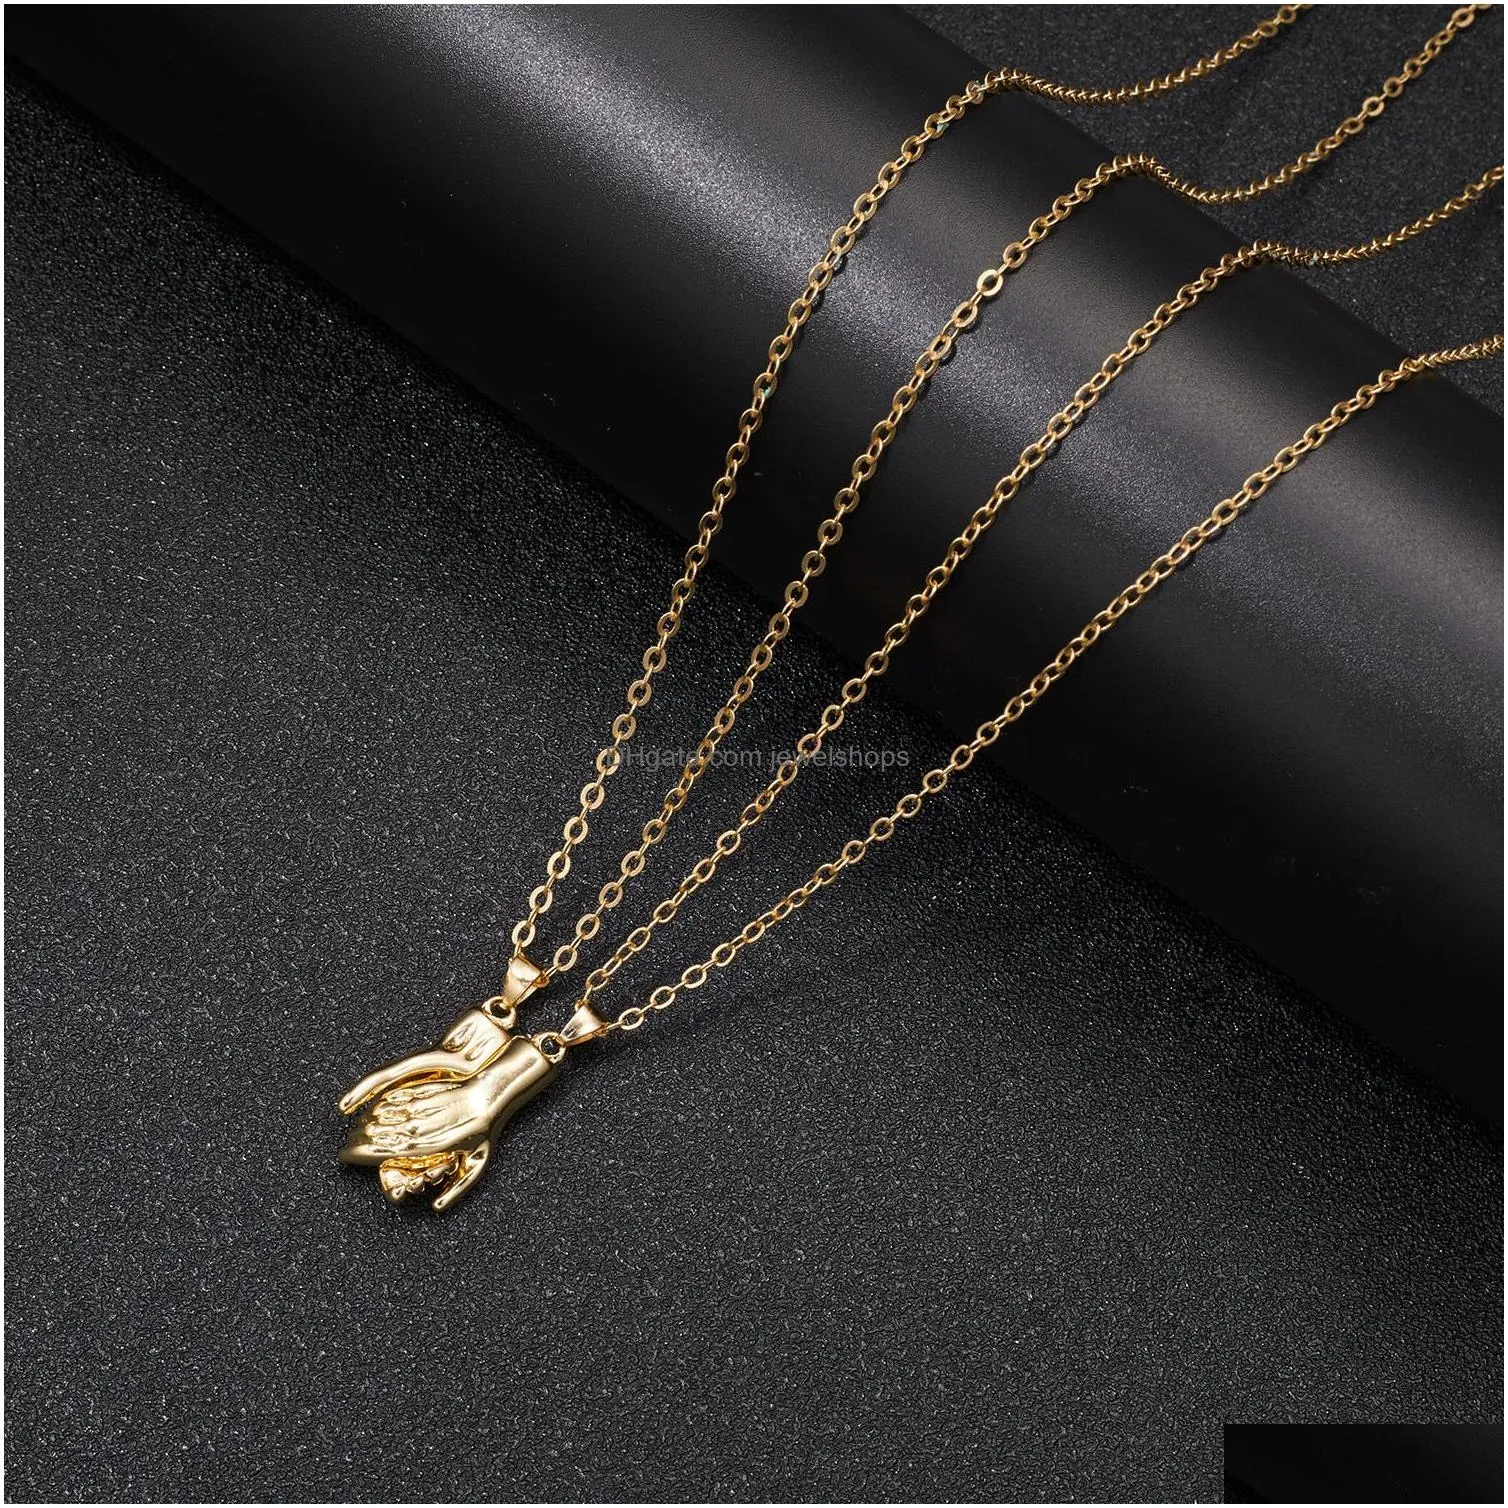 Pendant Necklaces 2Pcs/Lot Magnetic Hand In Pendant Necklace Matching Necklaces Jewelry For Couple Friendship Valentines Day Drop Deli Dhdmy